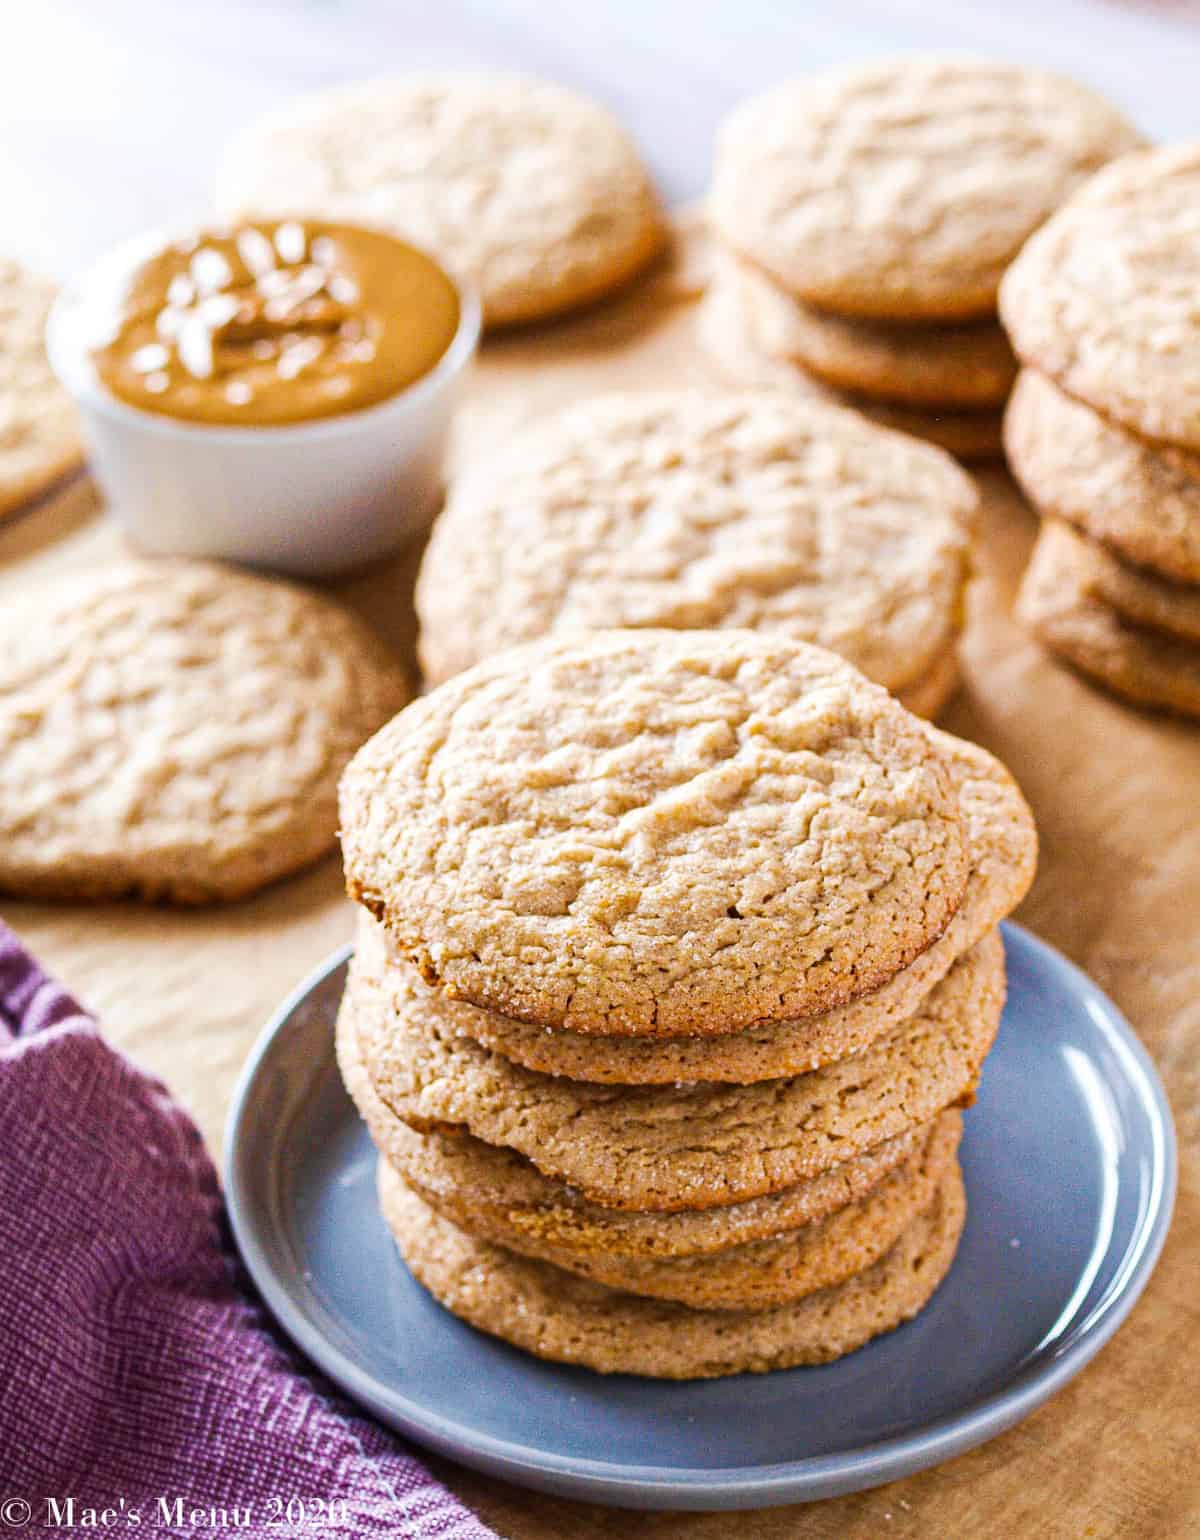 Multiple pies of peanut butter cookies on a wooden table